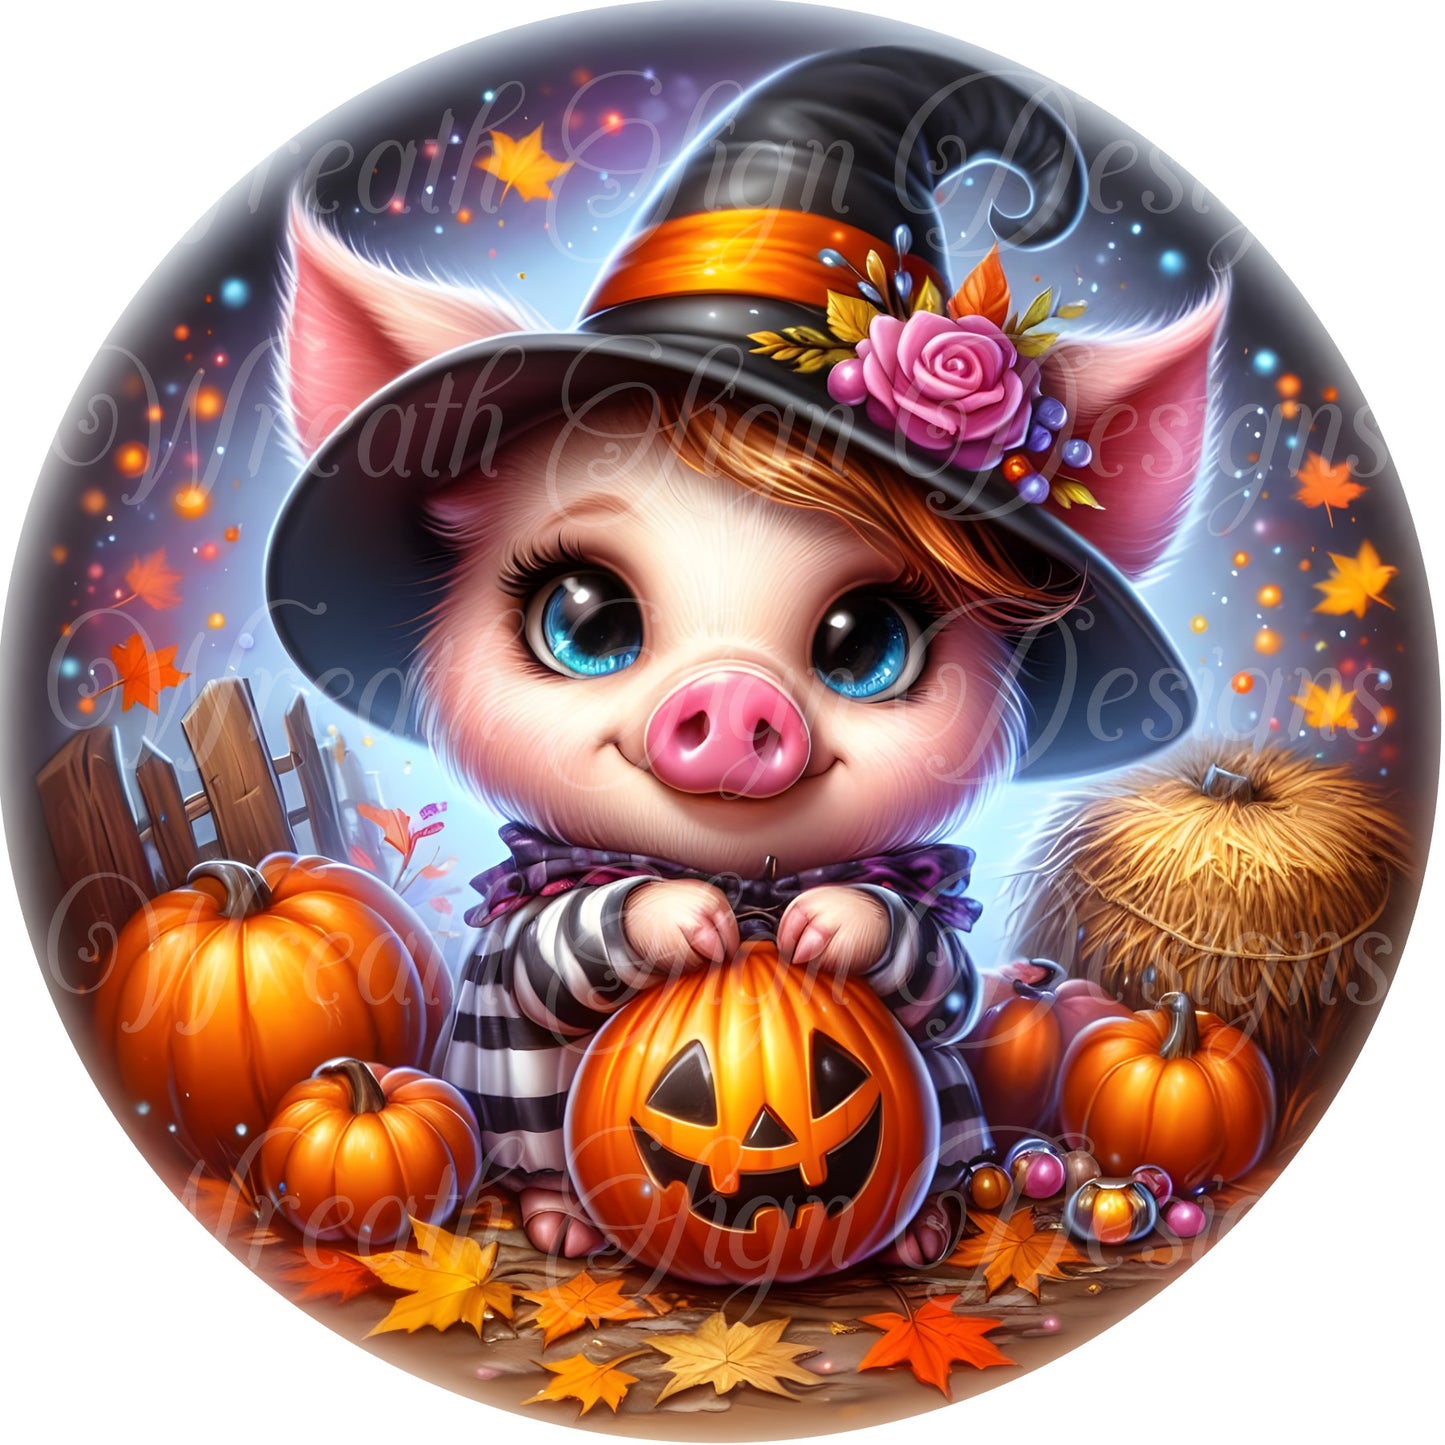 Whimsical Halloween Pig, trick -or- treat pig dressed as witch, Piglet and pumpkin round metal wreath sign, wreath center, wreath attachment